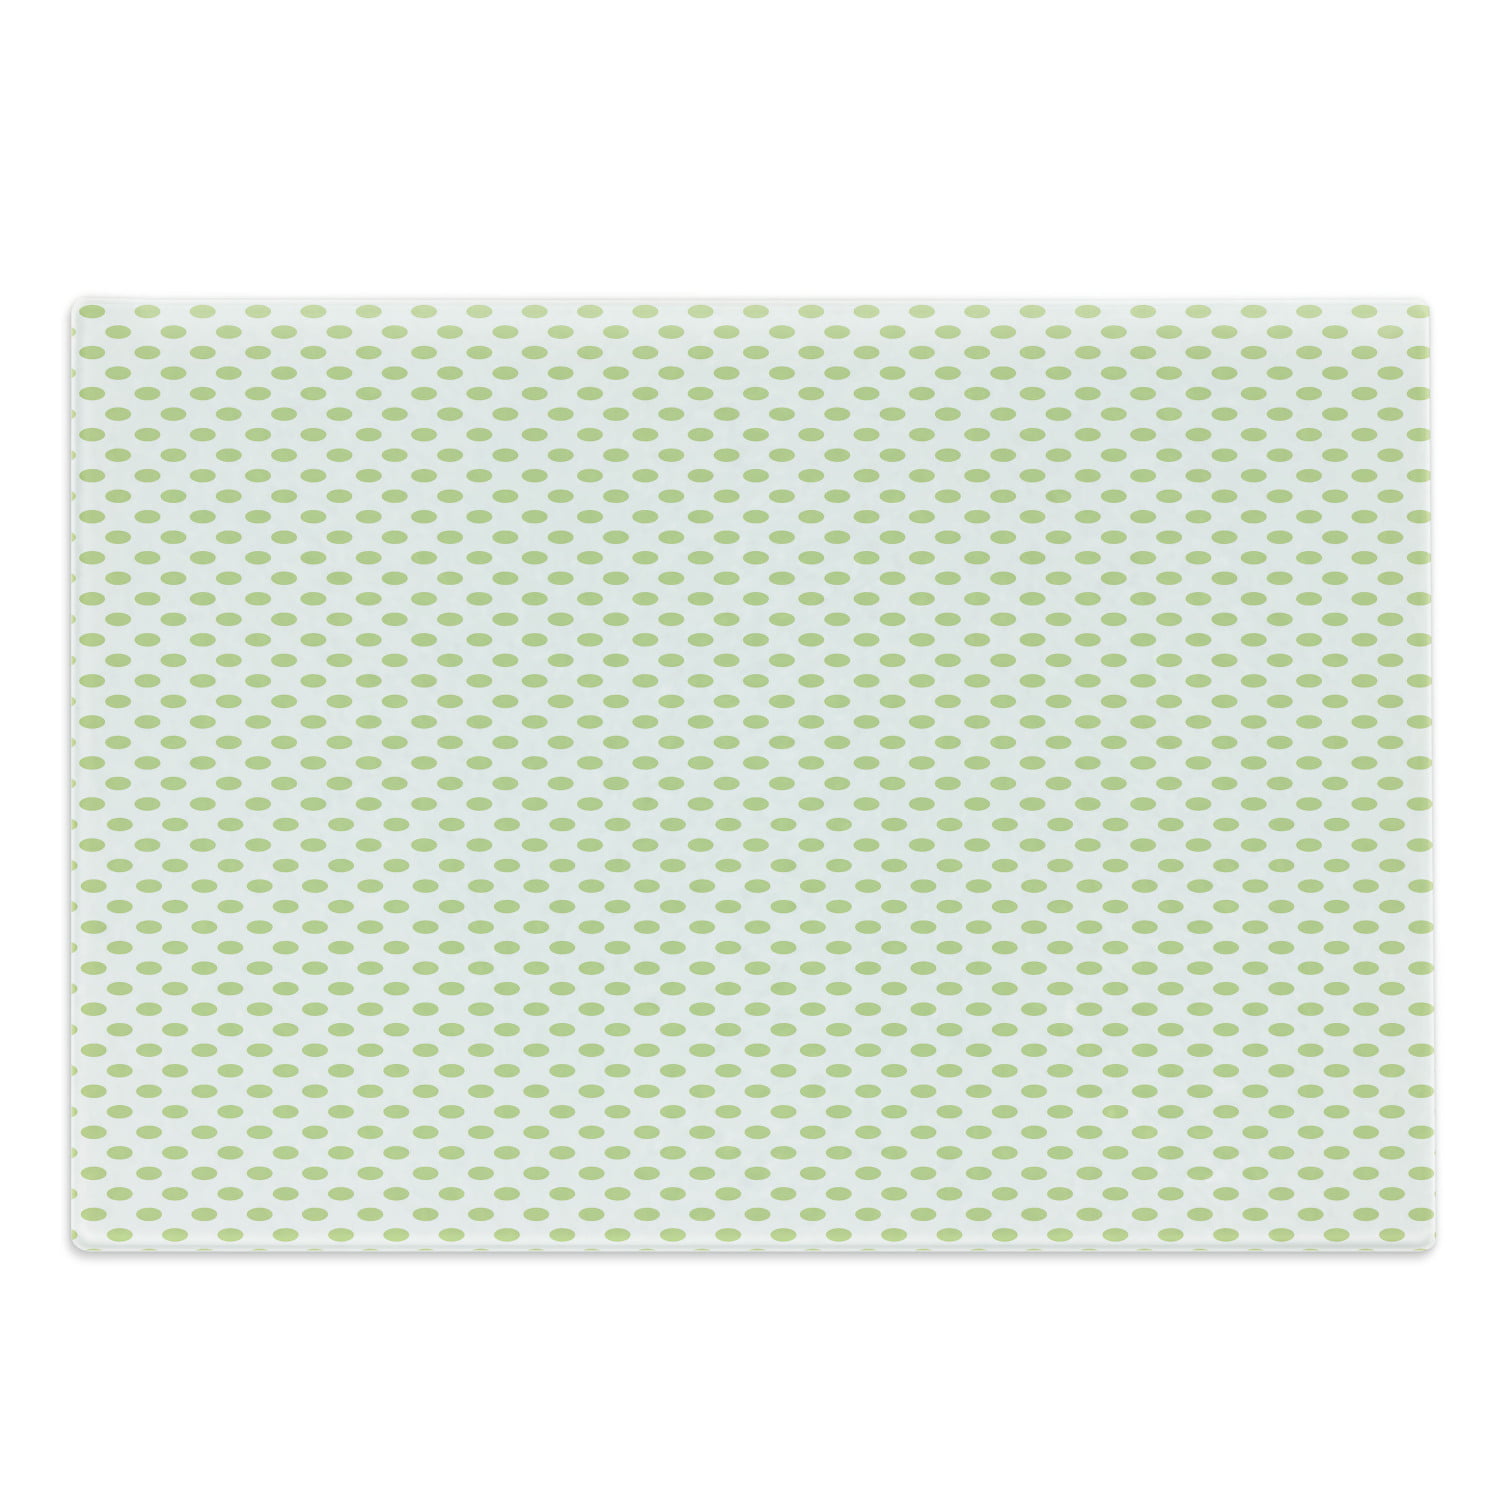 Green Cutting Board, 50s 60s Style Retro Vintage Inspired Simple Design  with Little Polka Dots Image, Decorative Tempered Glass Cutting and Serving  Board, Large Size, Green and White, by Ambesonne 